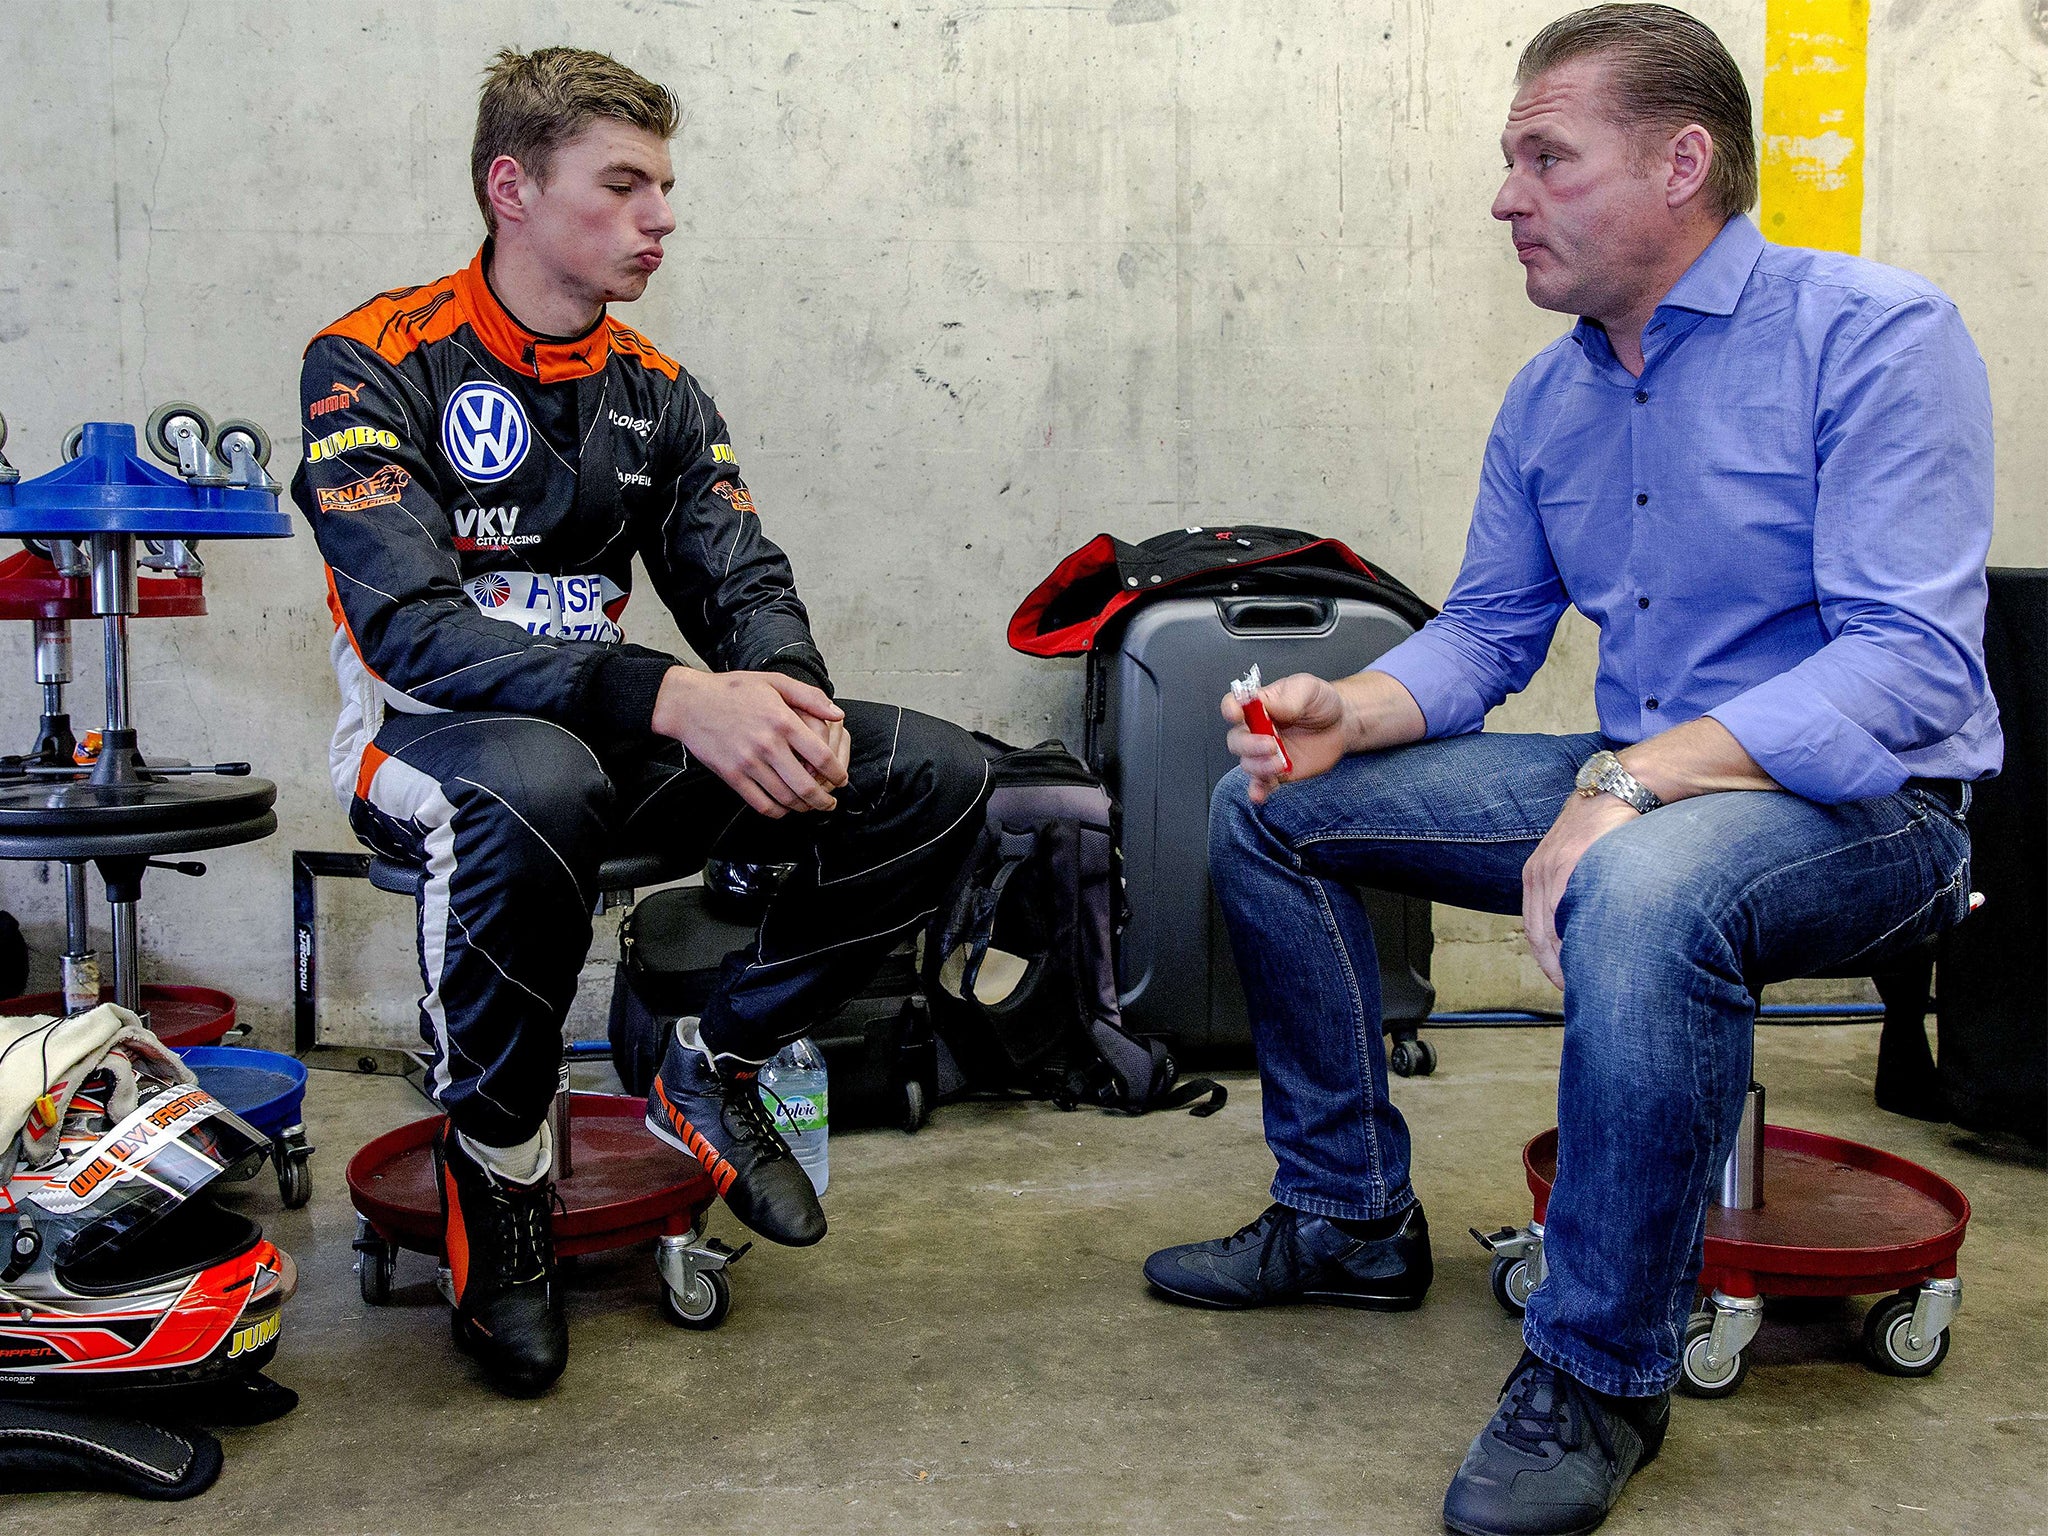 Max Verstappen (left), speaking with his father, the former F1 driver Jos Verstappen